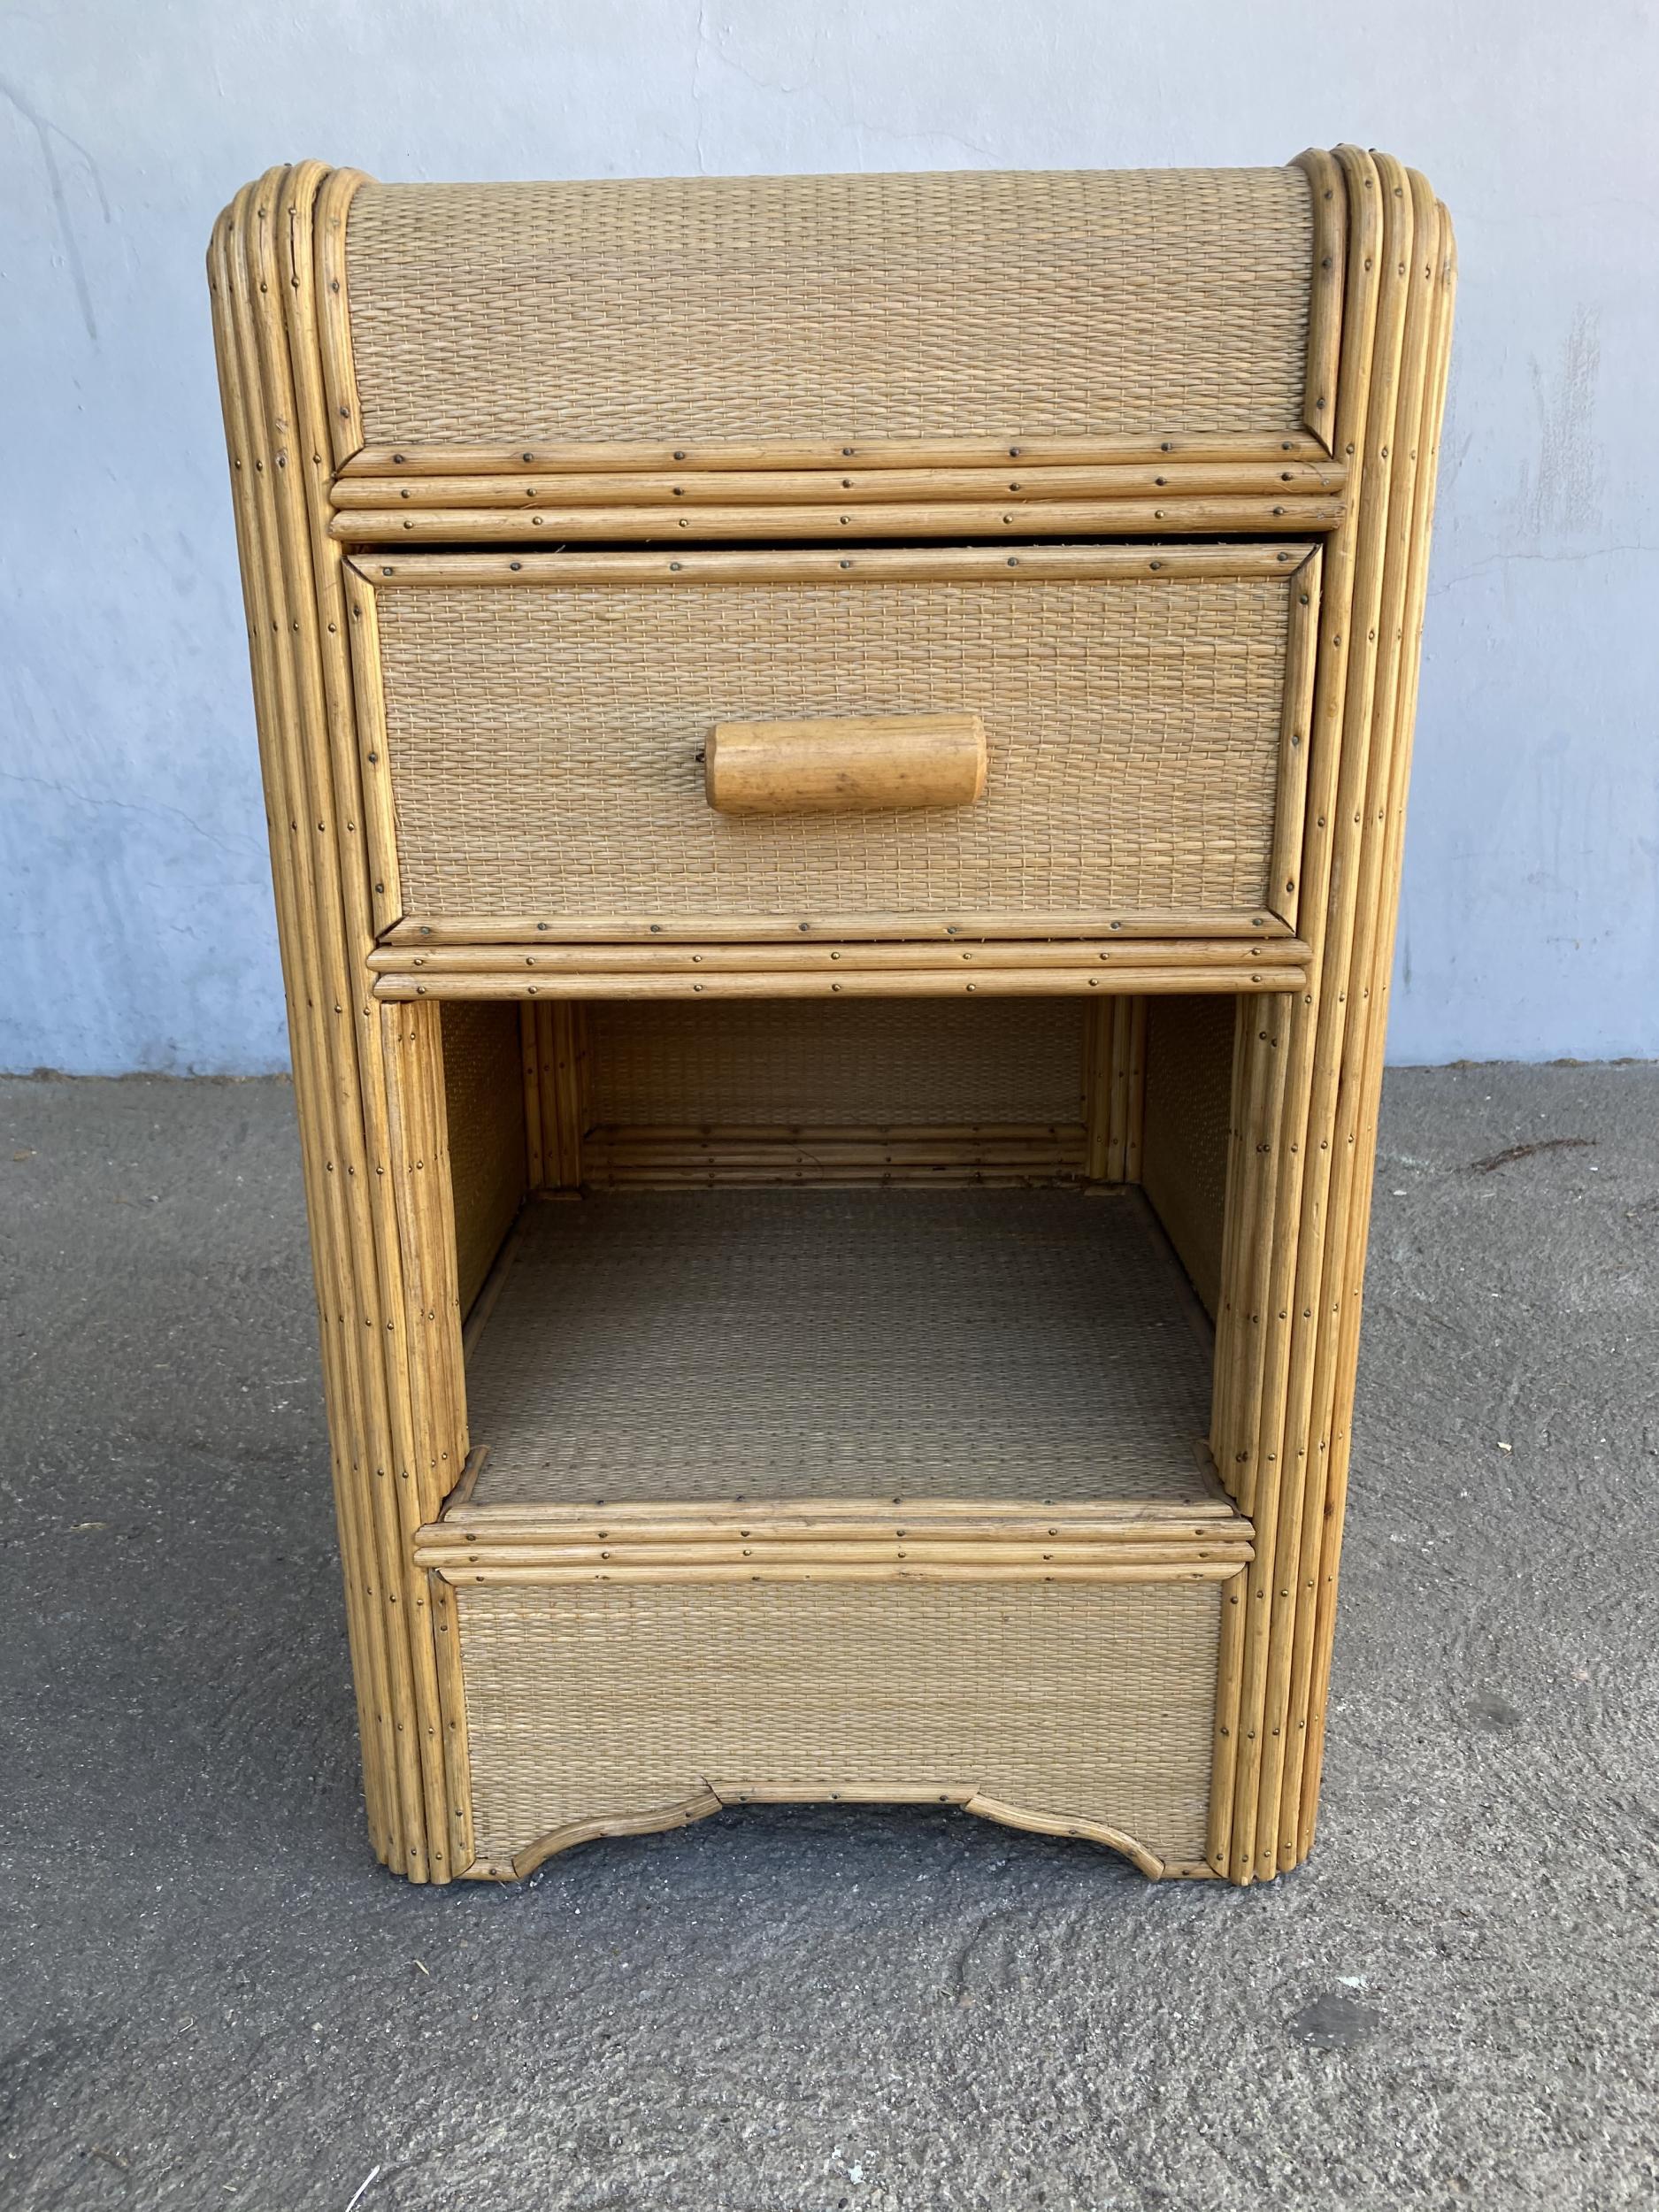 Streamline stick rattan side table nightstand with grass-mat coverings, edges are finished with brass nails. The side table has a pull out drawer and cabinet underneath. 

Restored to new for you.

All rattan, bamboo, and wicker furniture has